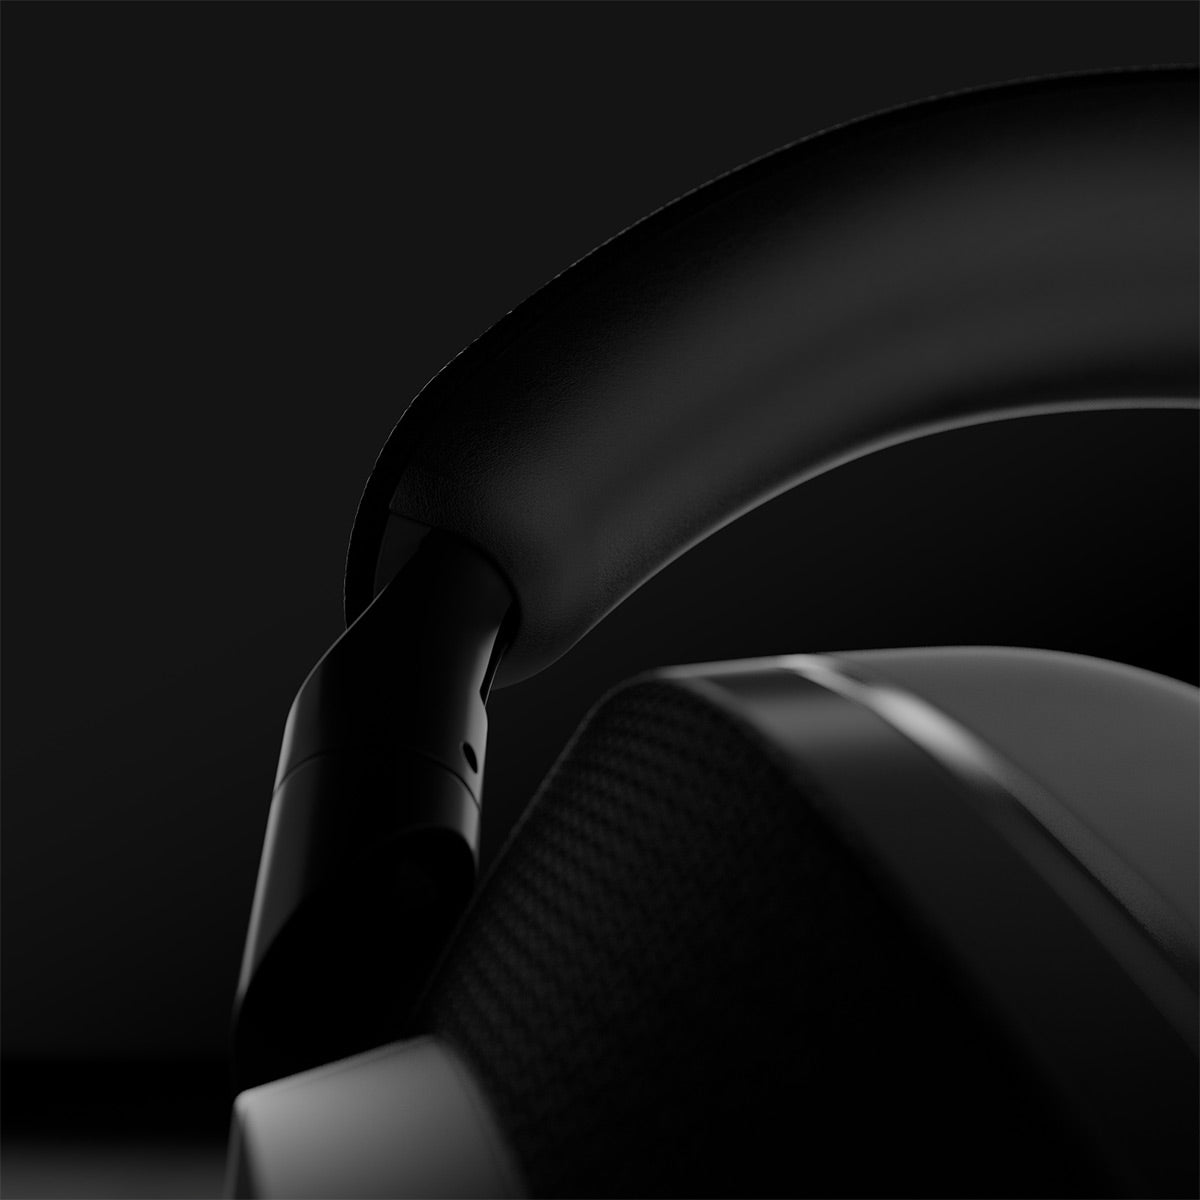 Bowers & Wilkins Px7 S2e Wireless Noise Canceling Bluetooth Headphones (Anthracite Black)